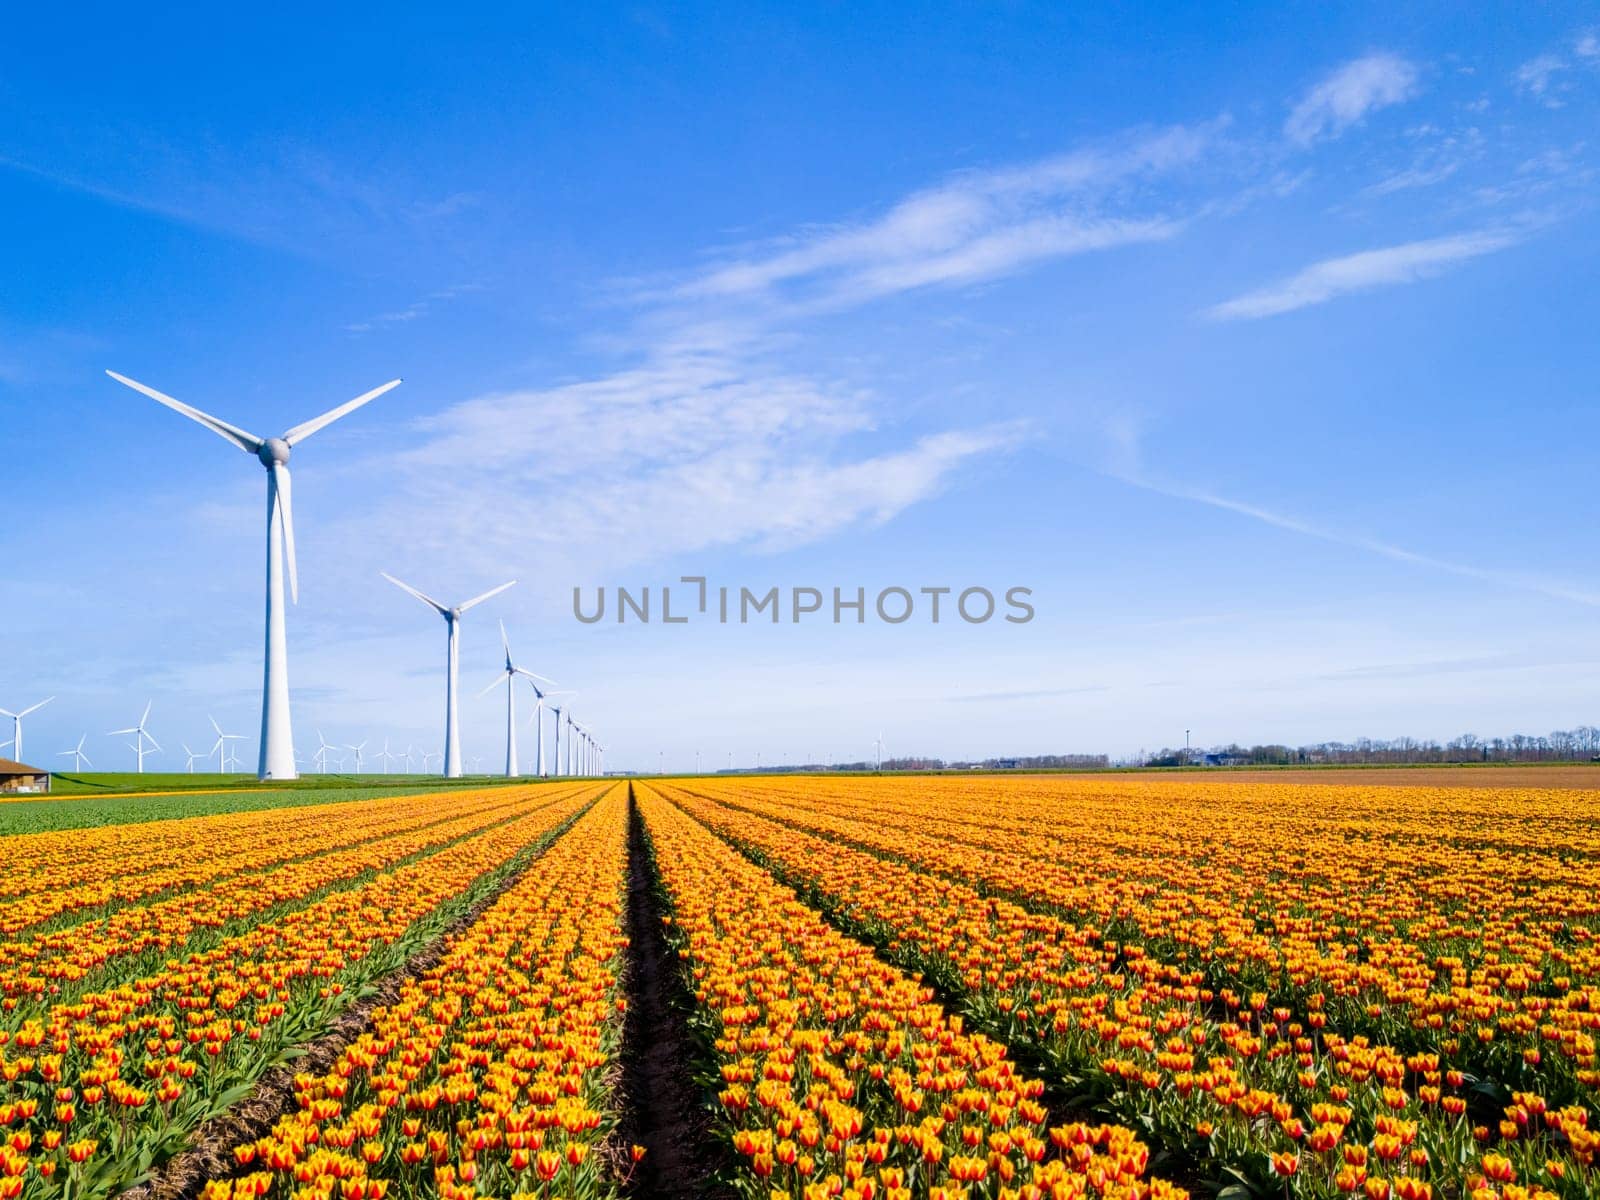 Vibrant tulips sway in a field stretching towards distant windmills, by fokkebok